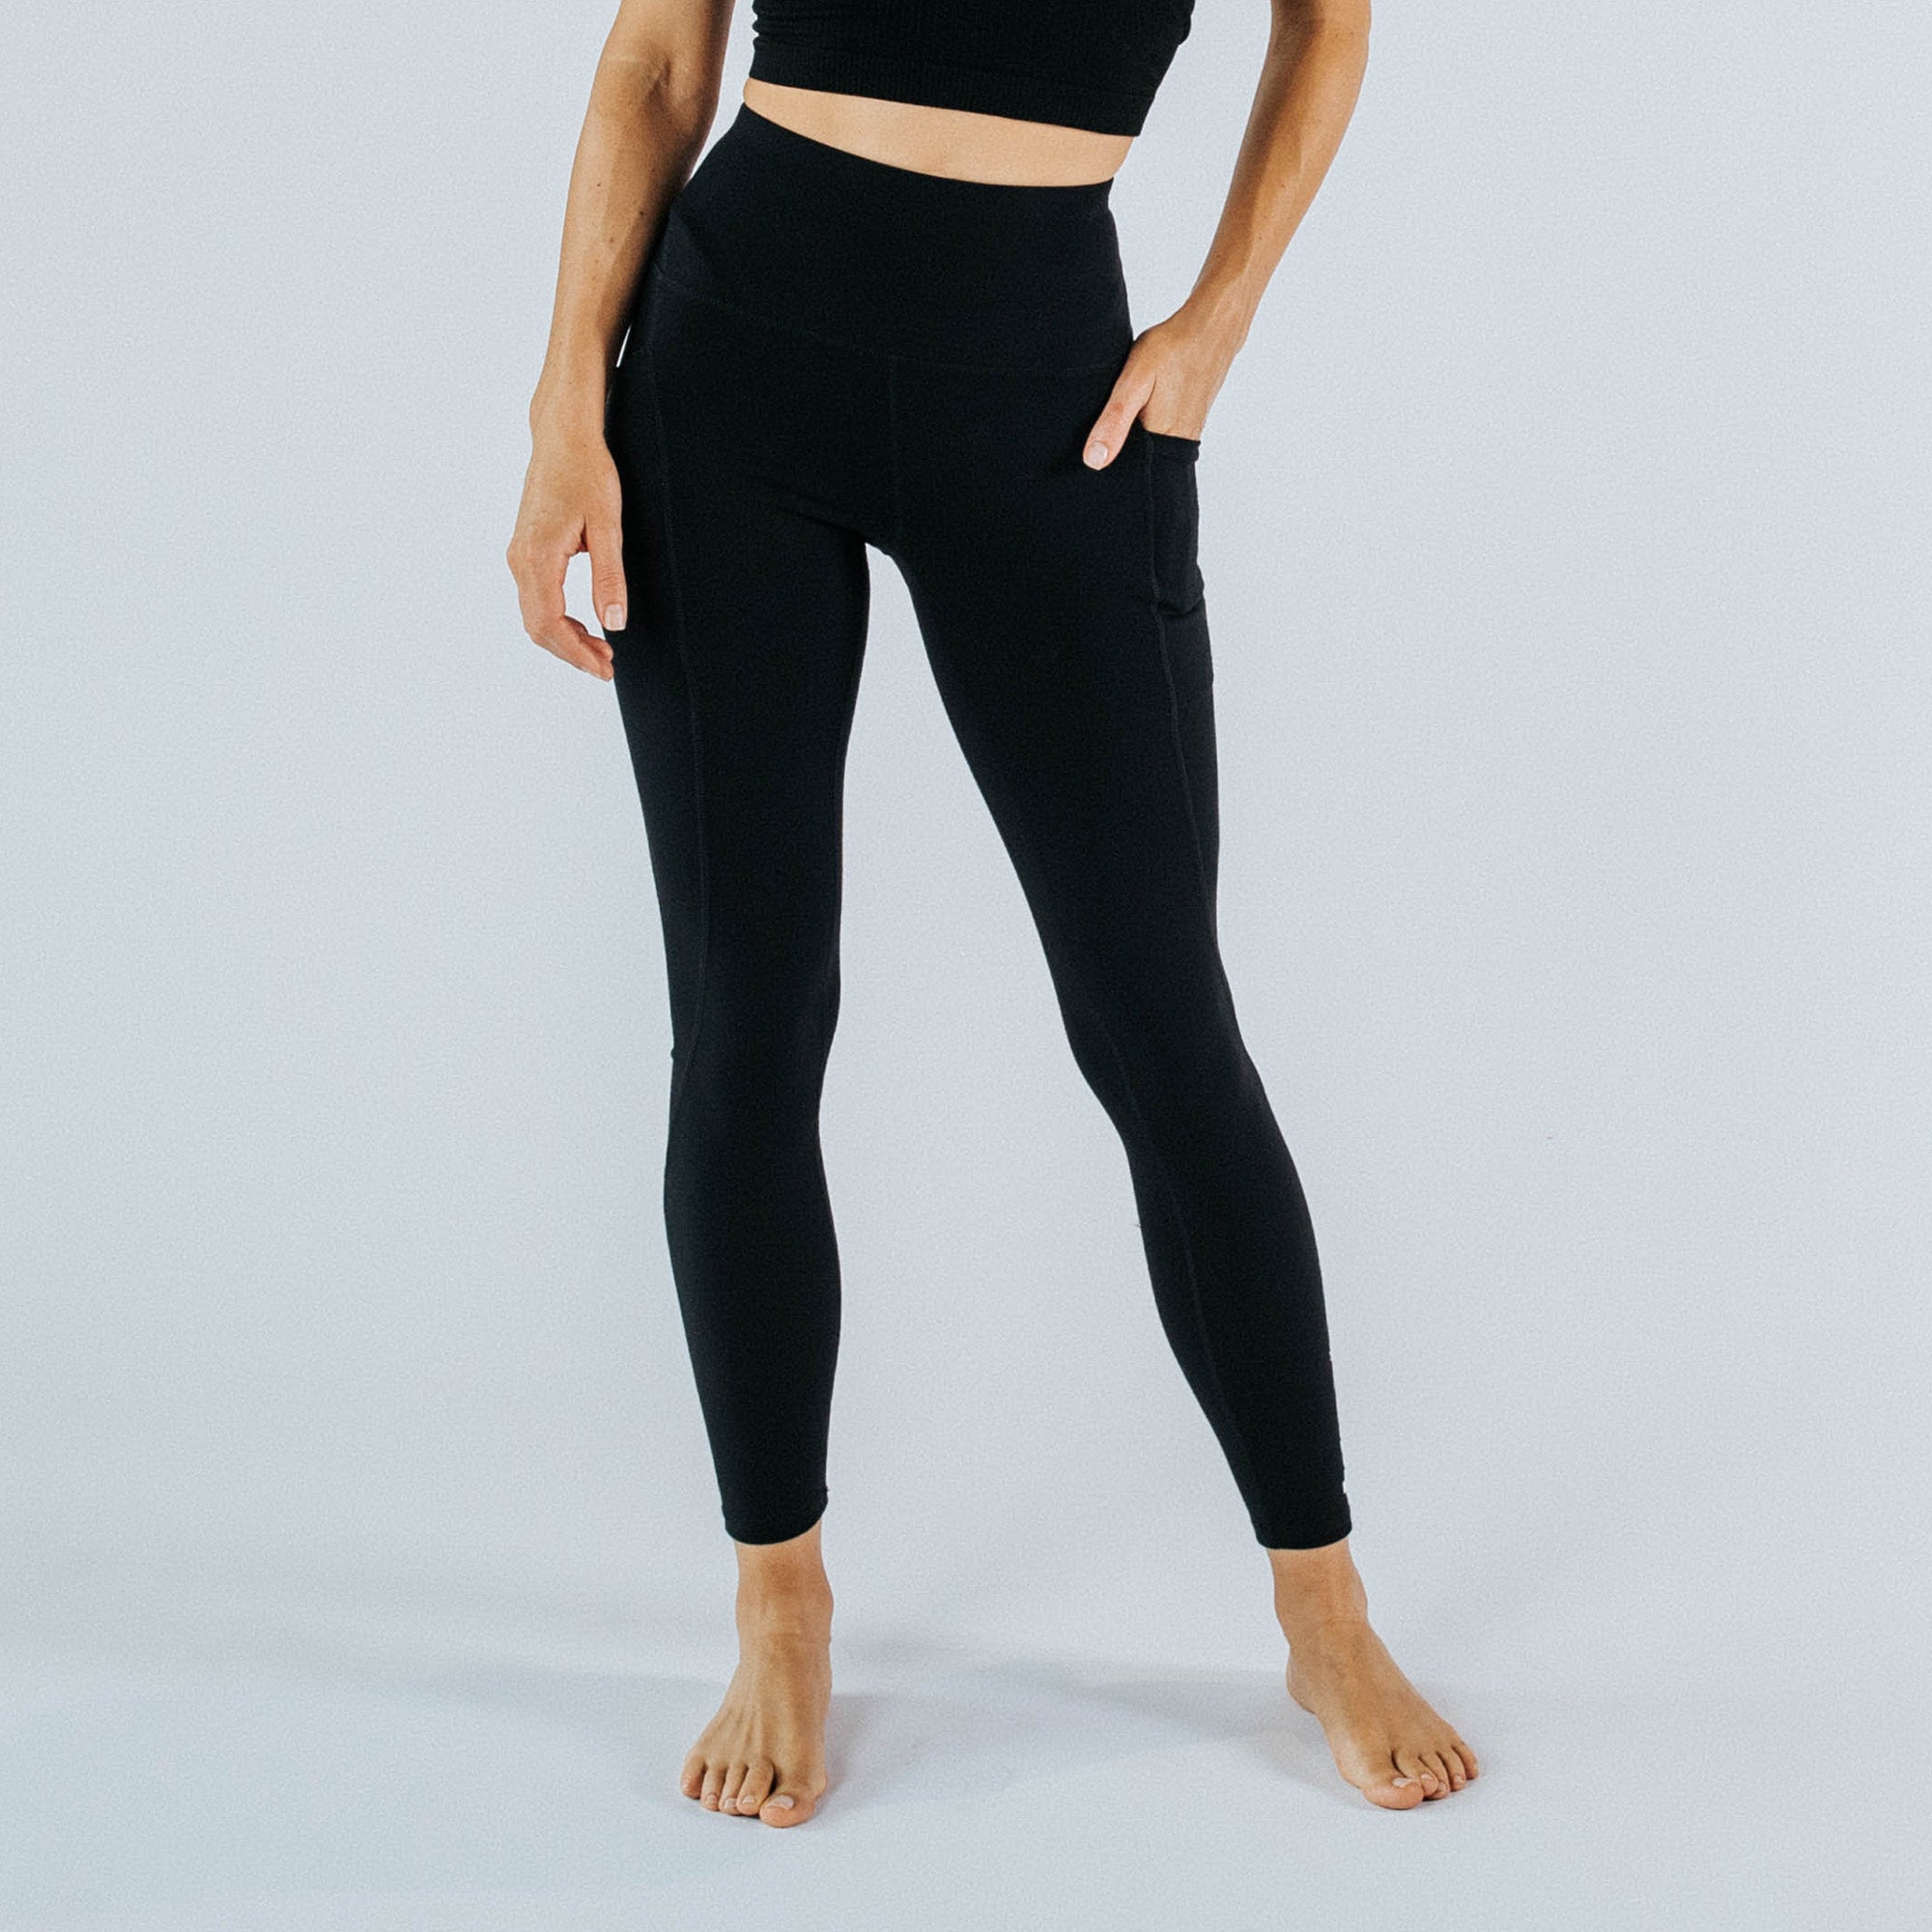 Chocolate Highwaisted Foil Leggings With Side Pockets - The Pretty